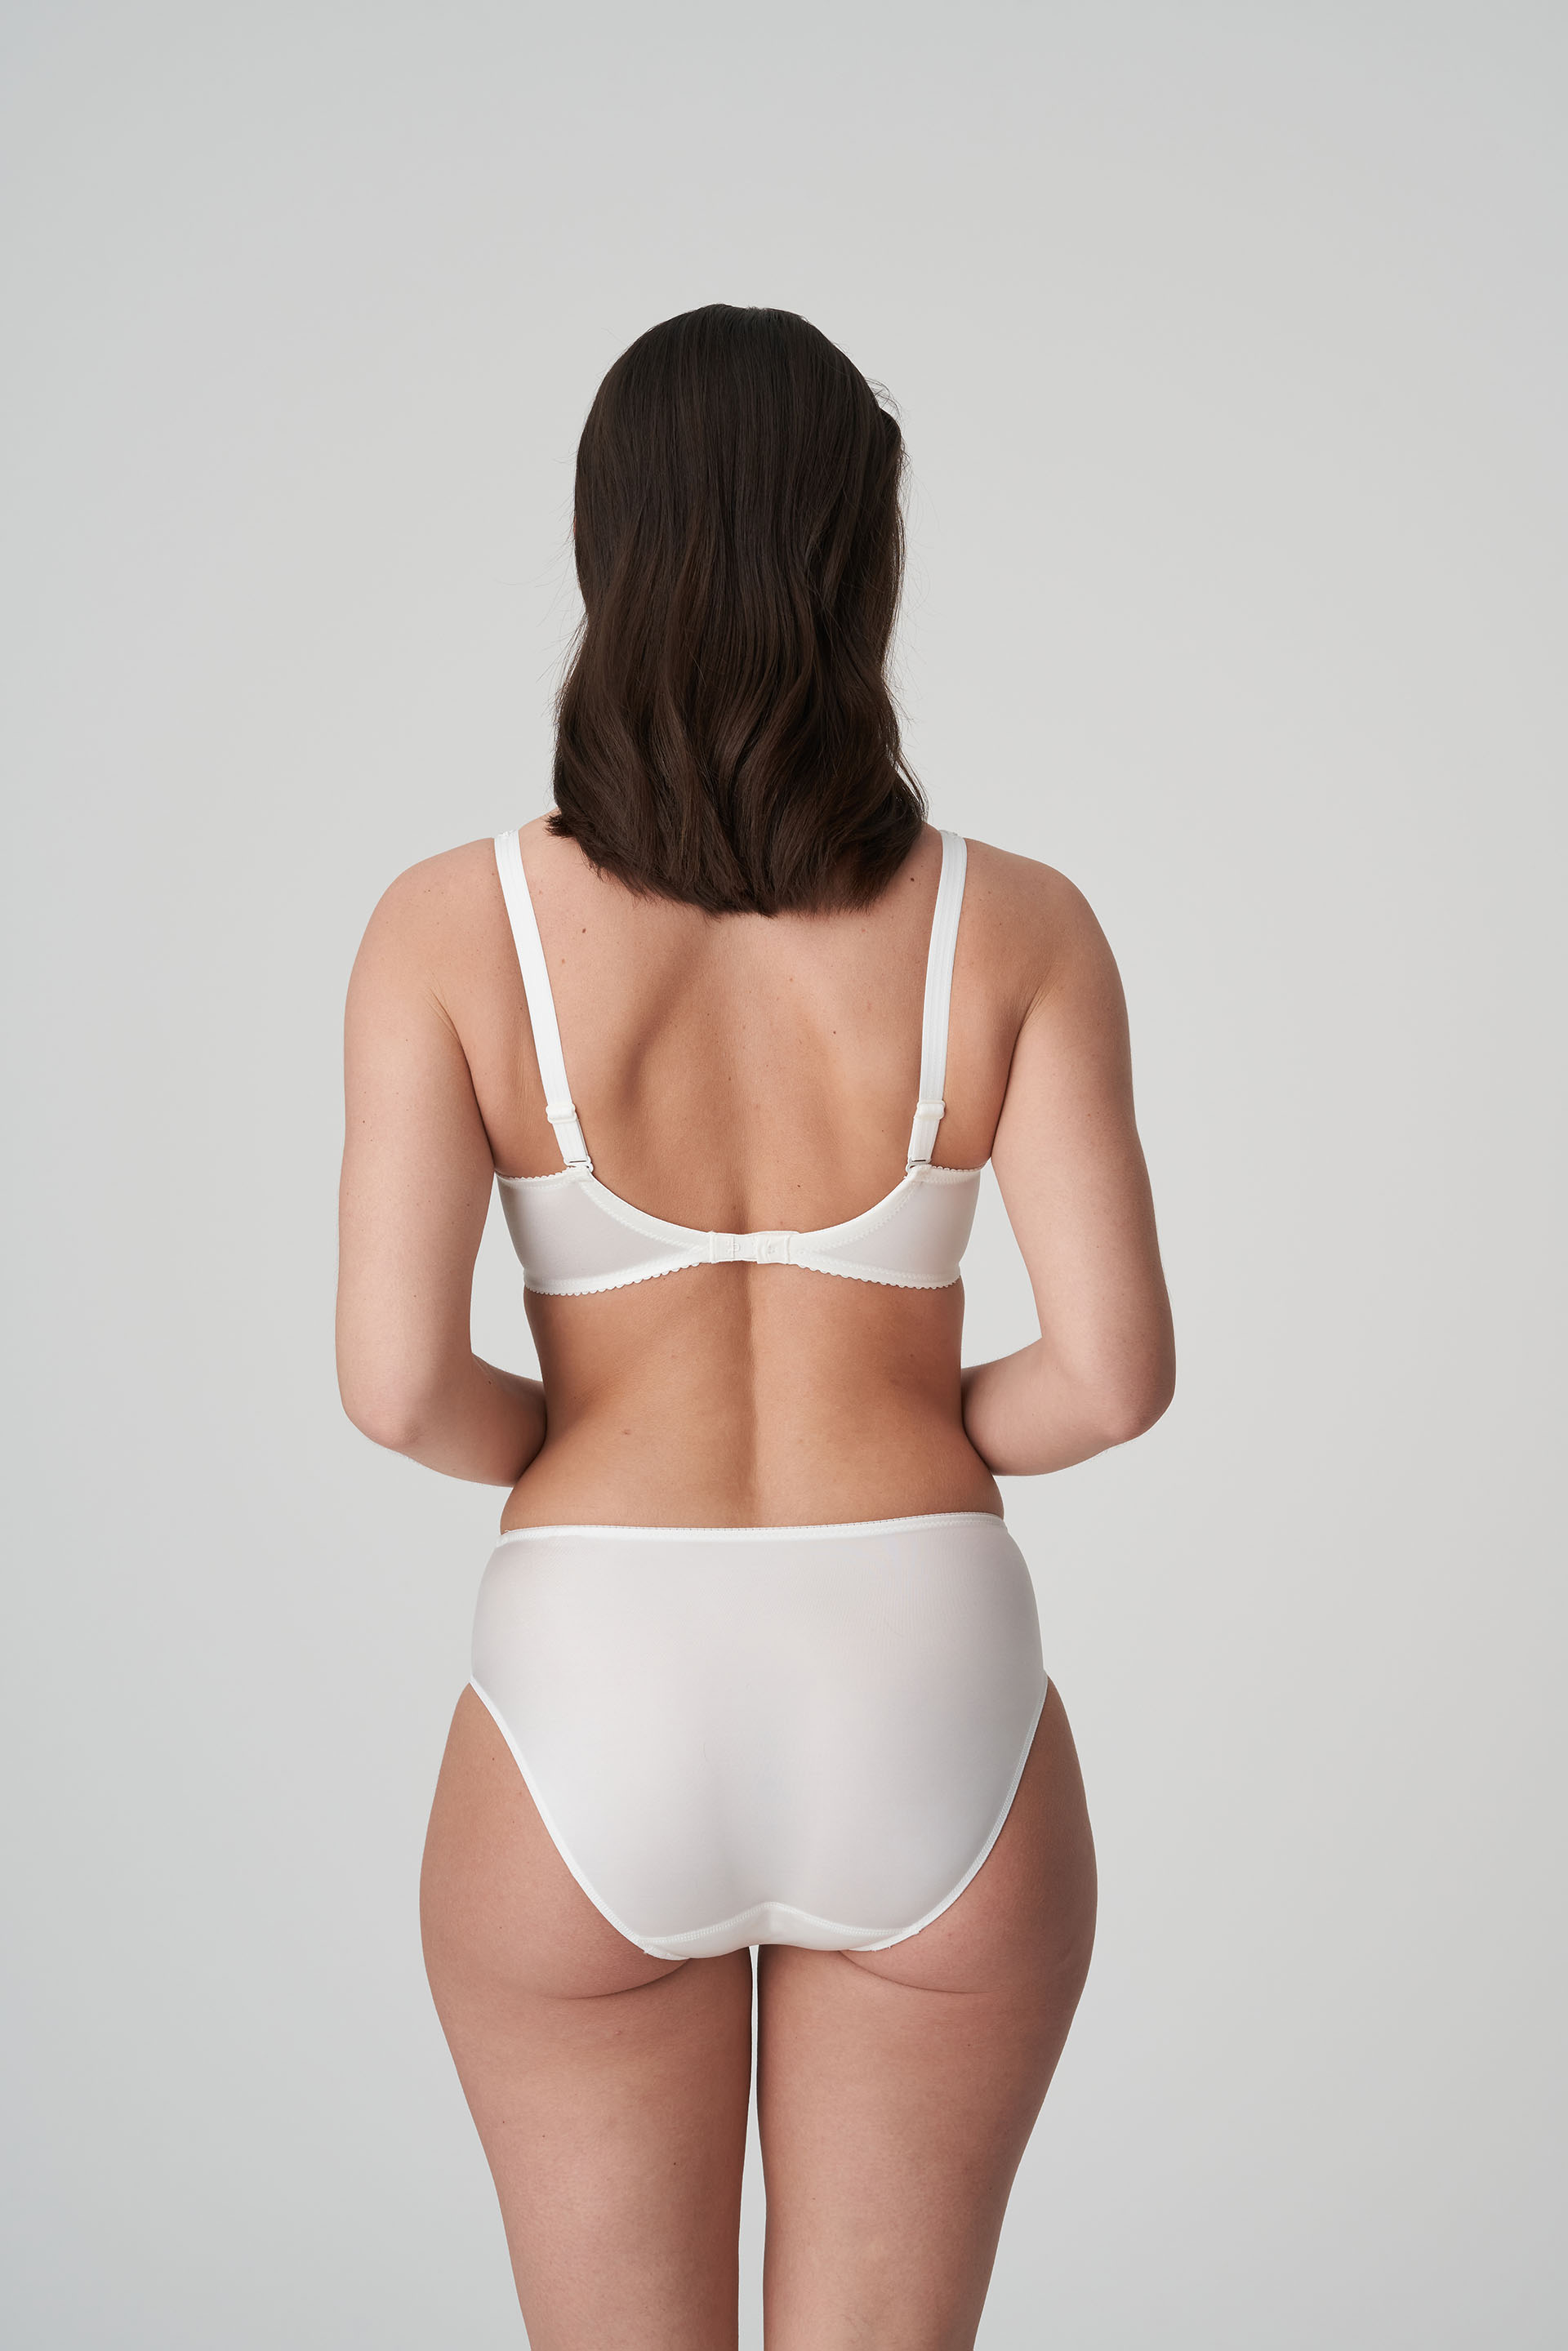 PrimaDonna SATIN natural non padded full cup seamless